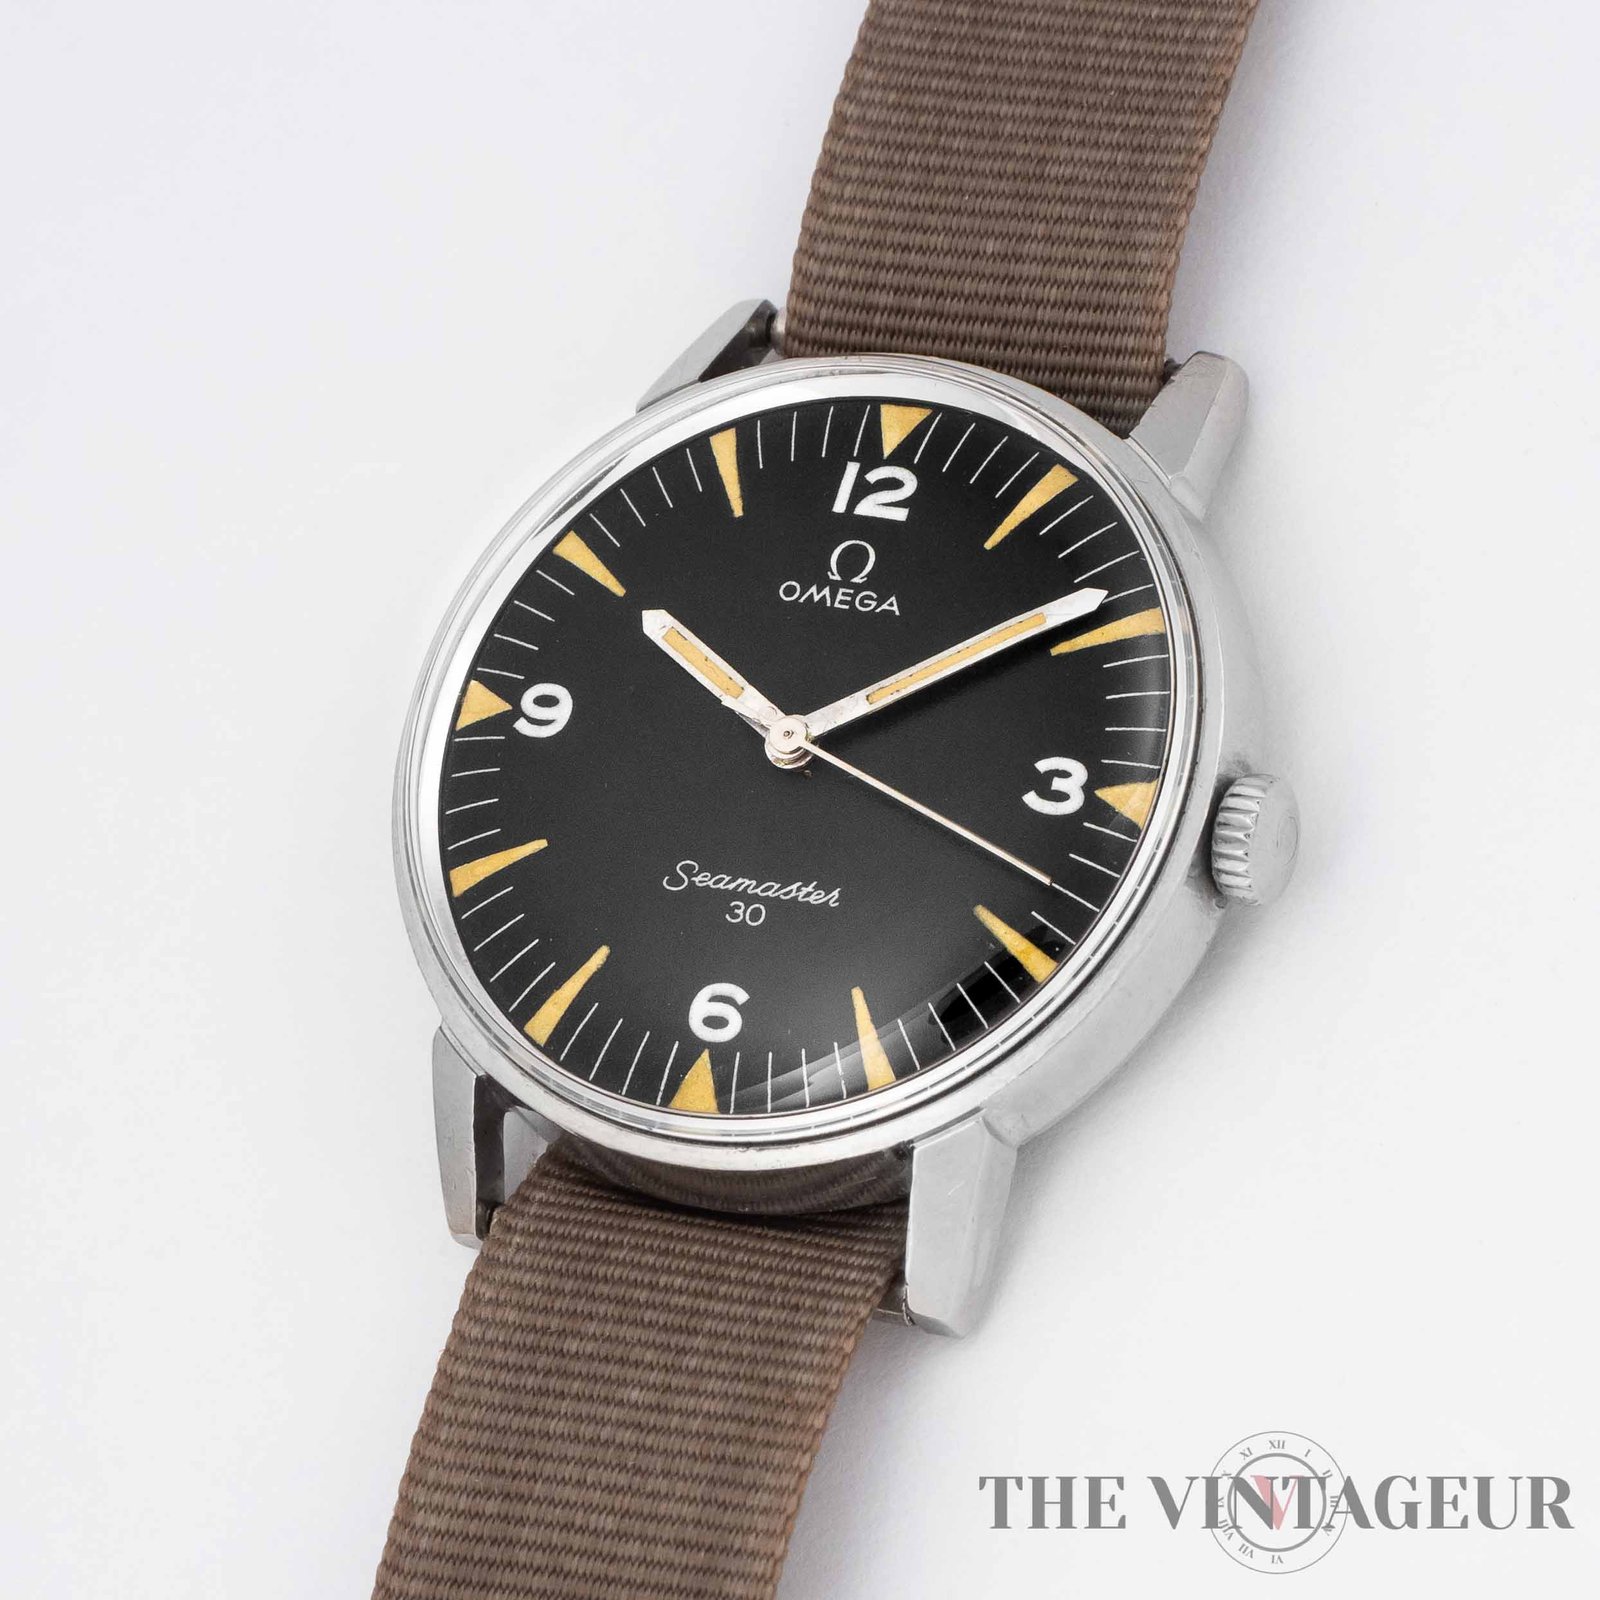 Omega Seamaster 30 paf military pakistan air force ref.135.011